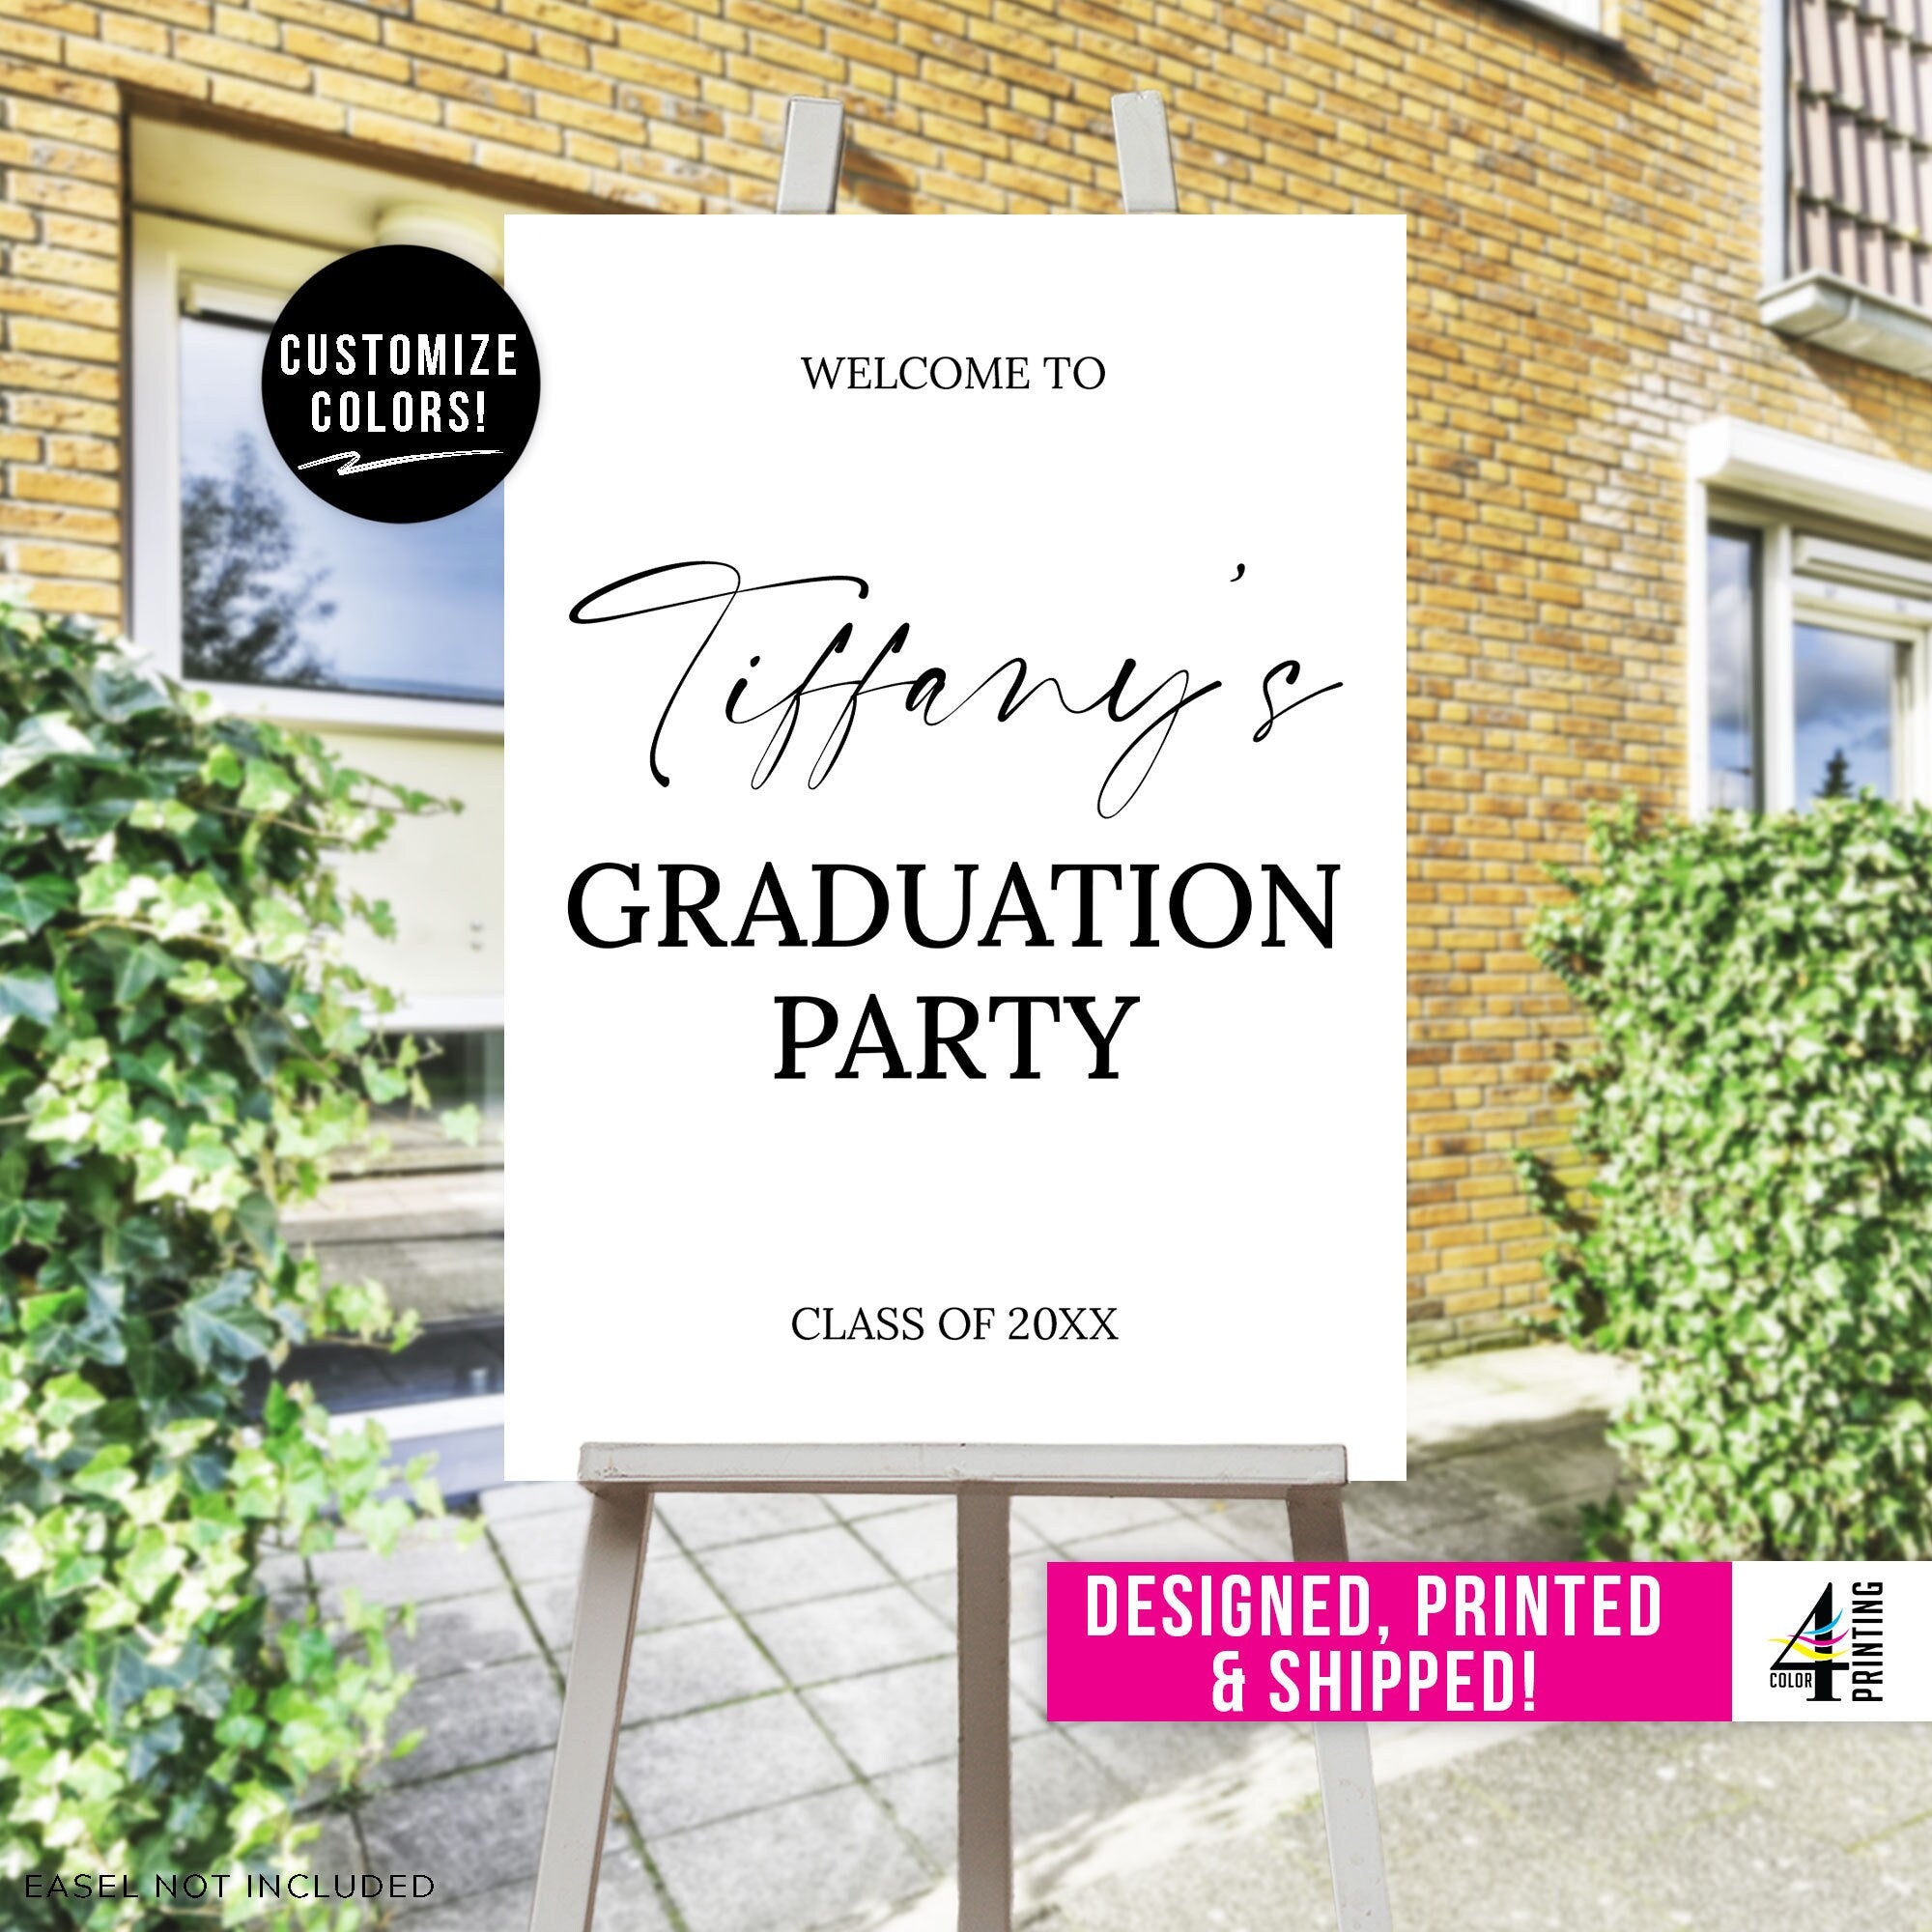 Custom printed graduation party welcome sign.